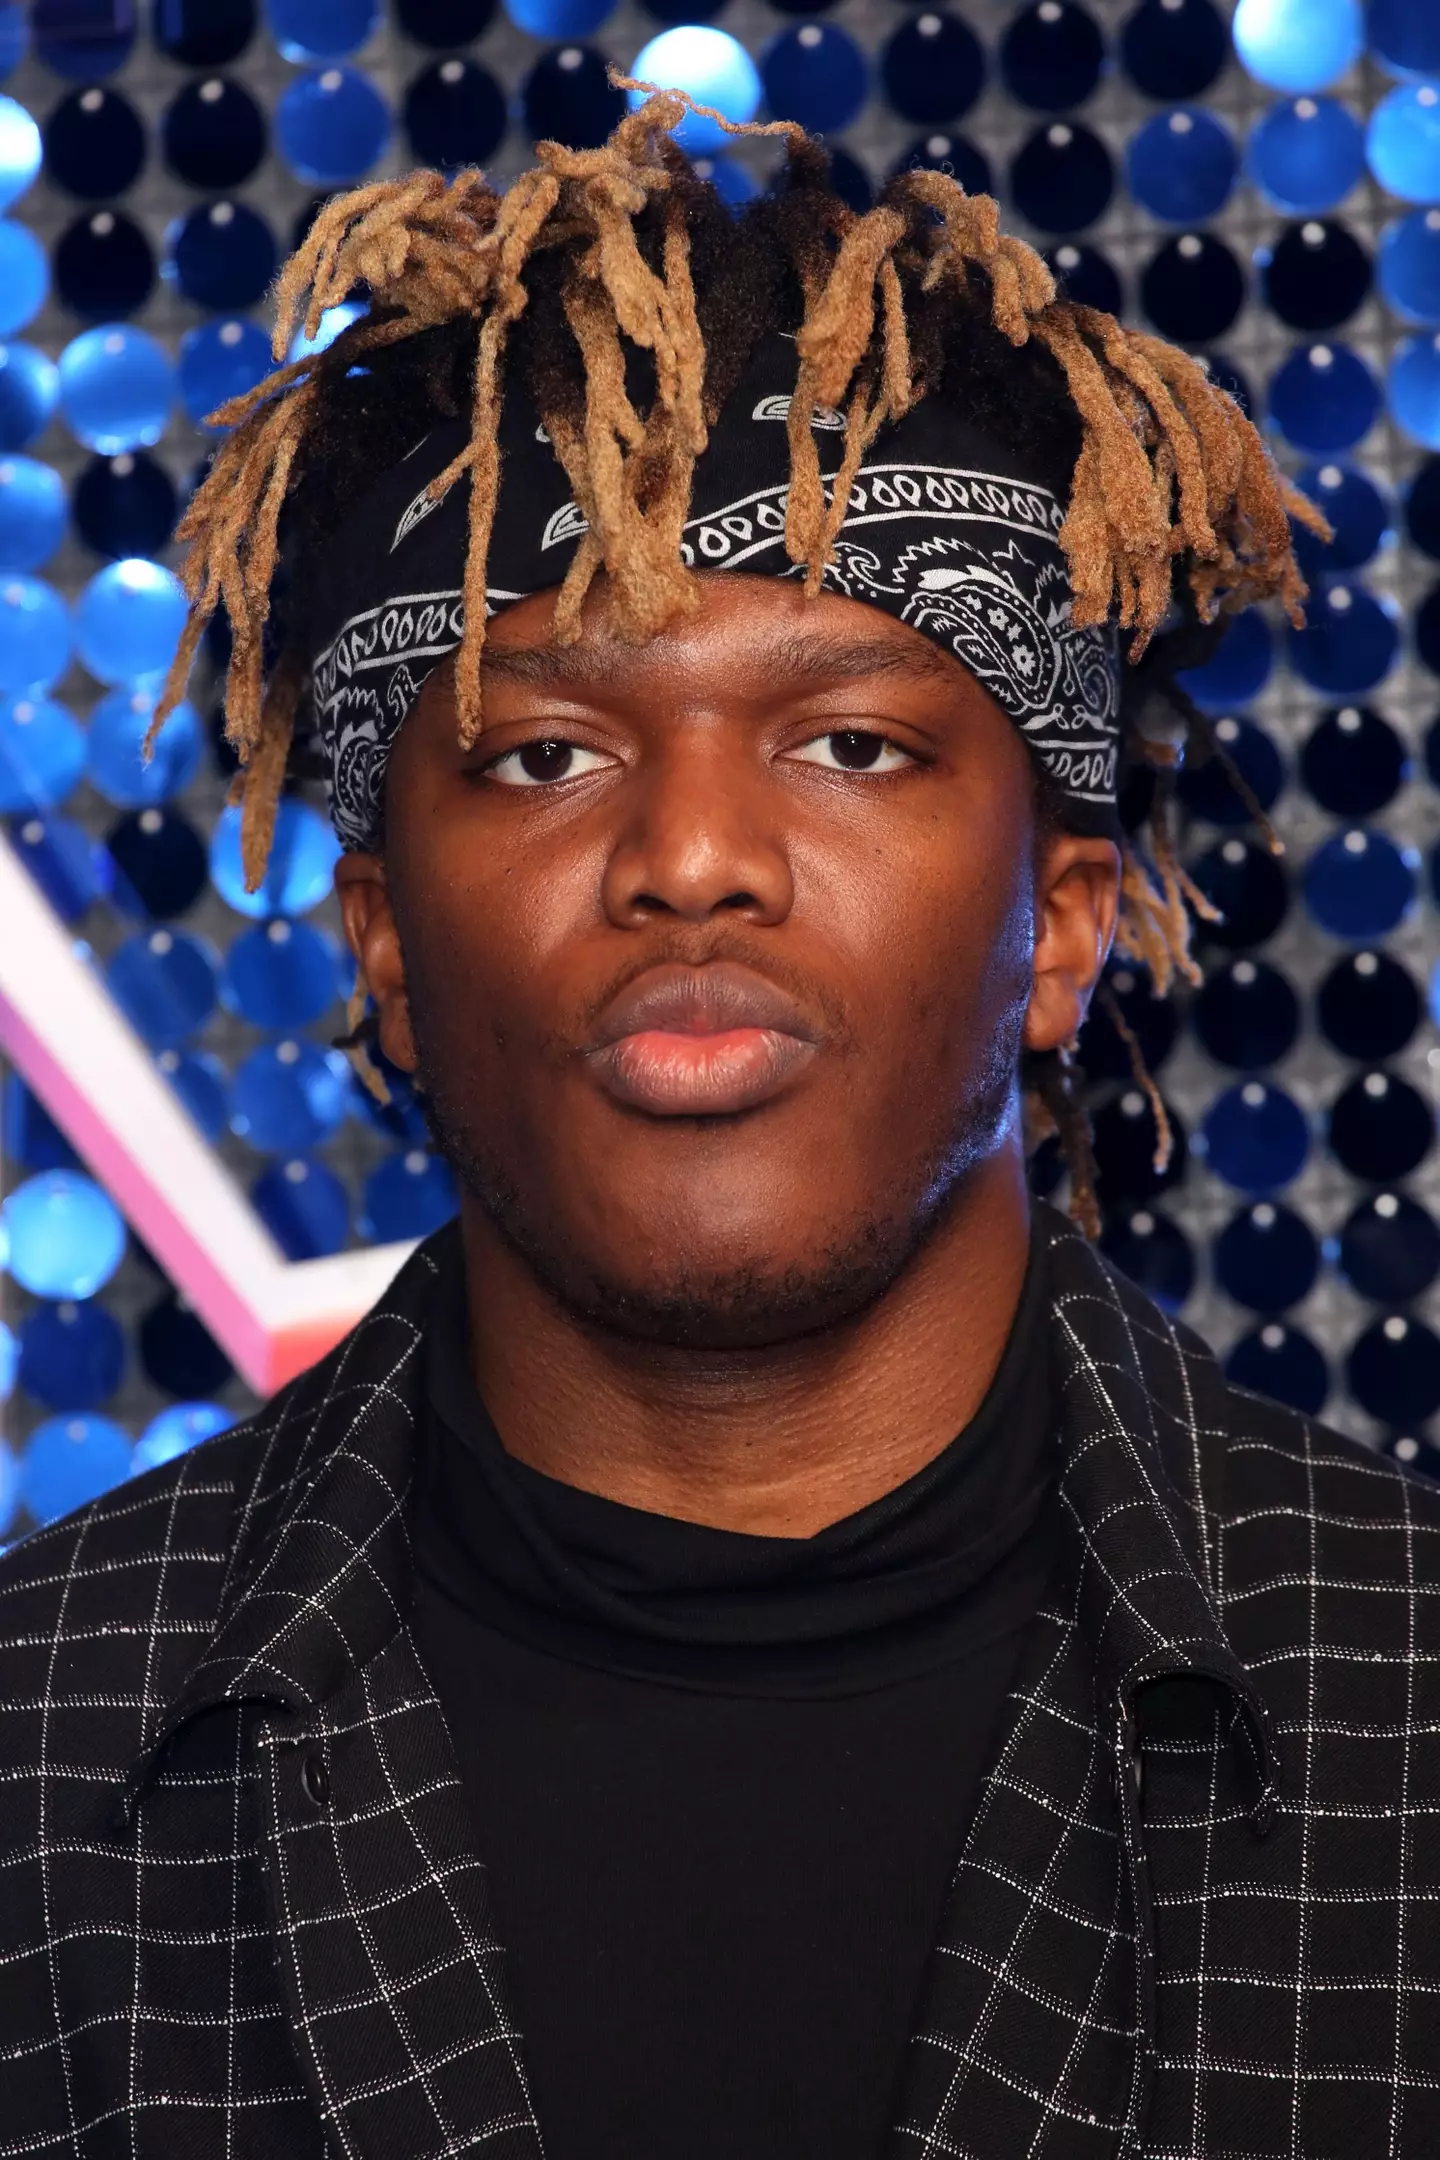 KSI doesn't make as much from TikTok as you'd think.